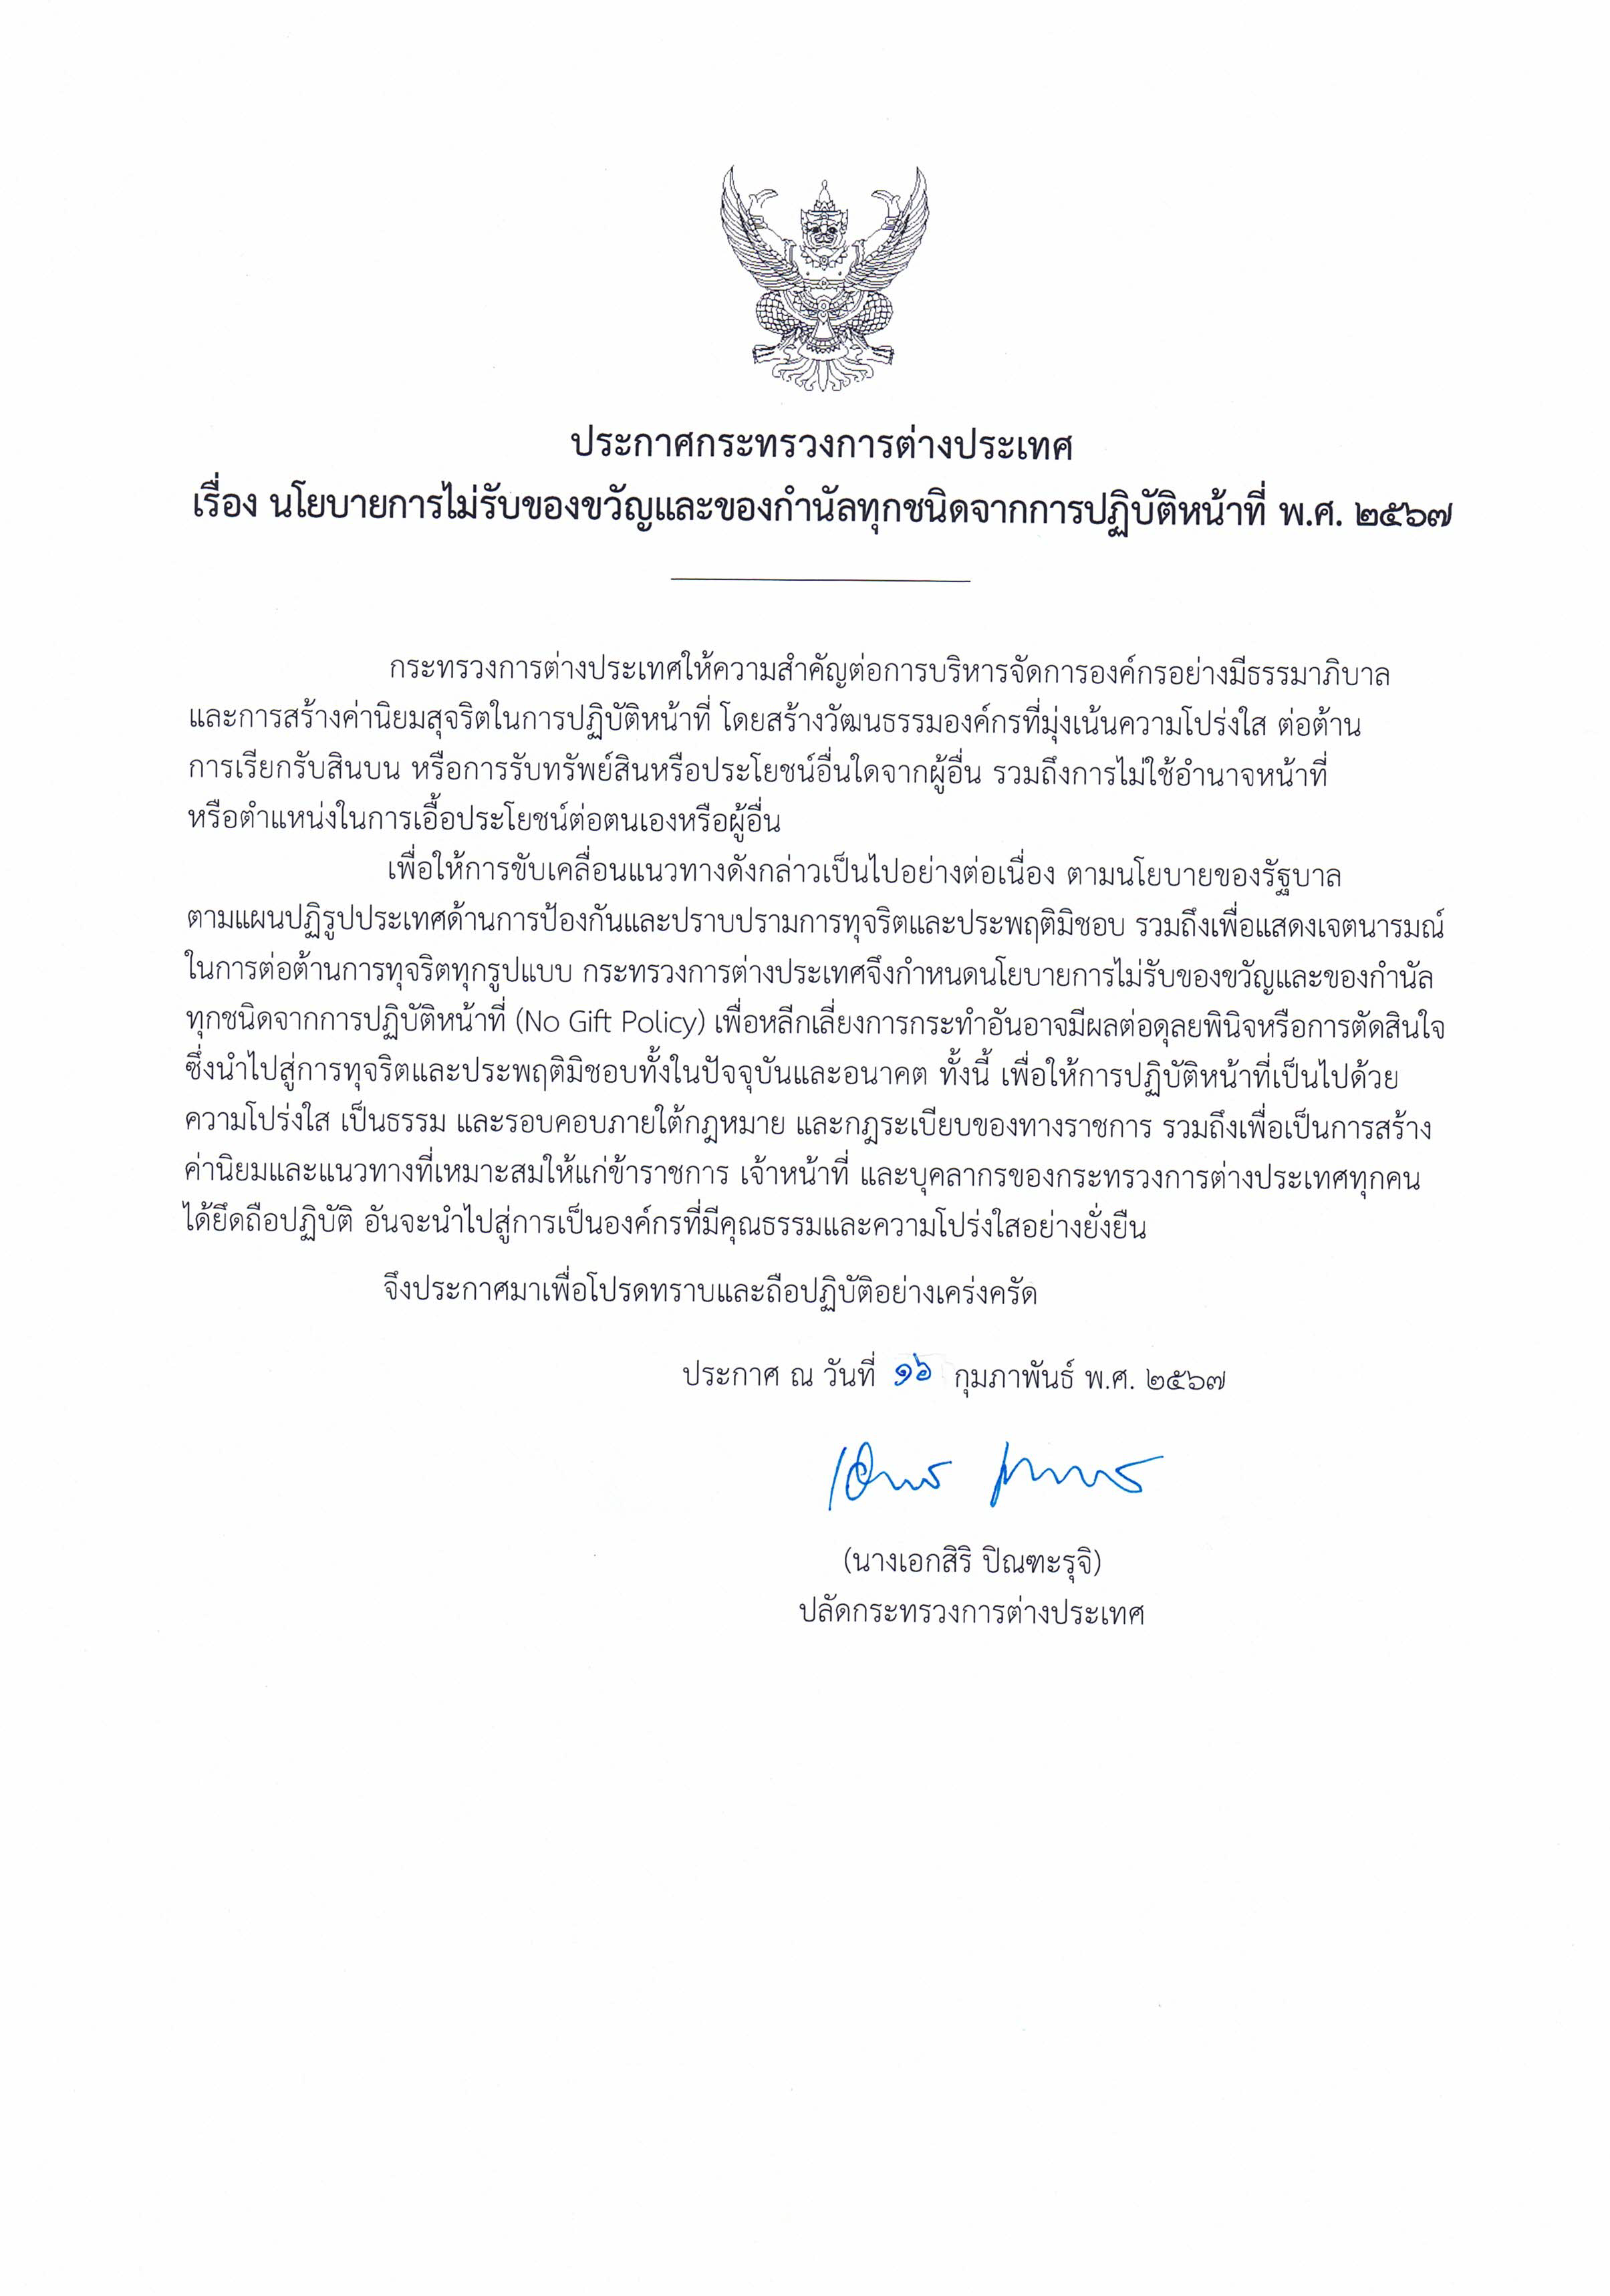 No_Gift_Policy_2567_Thai_ver.